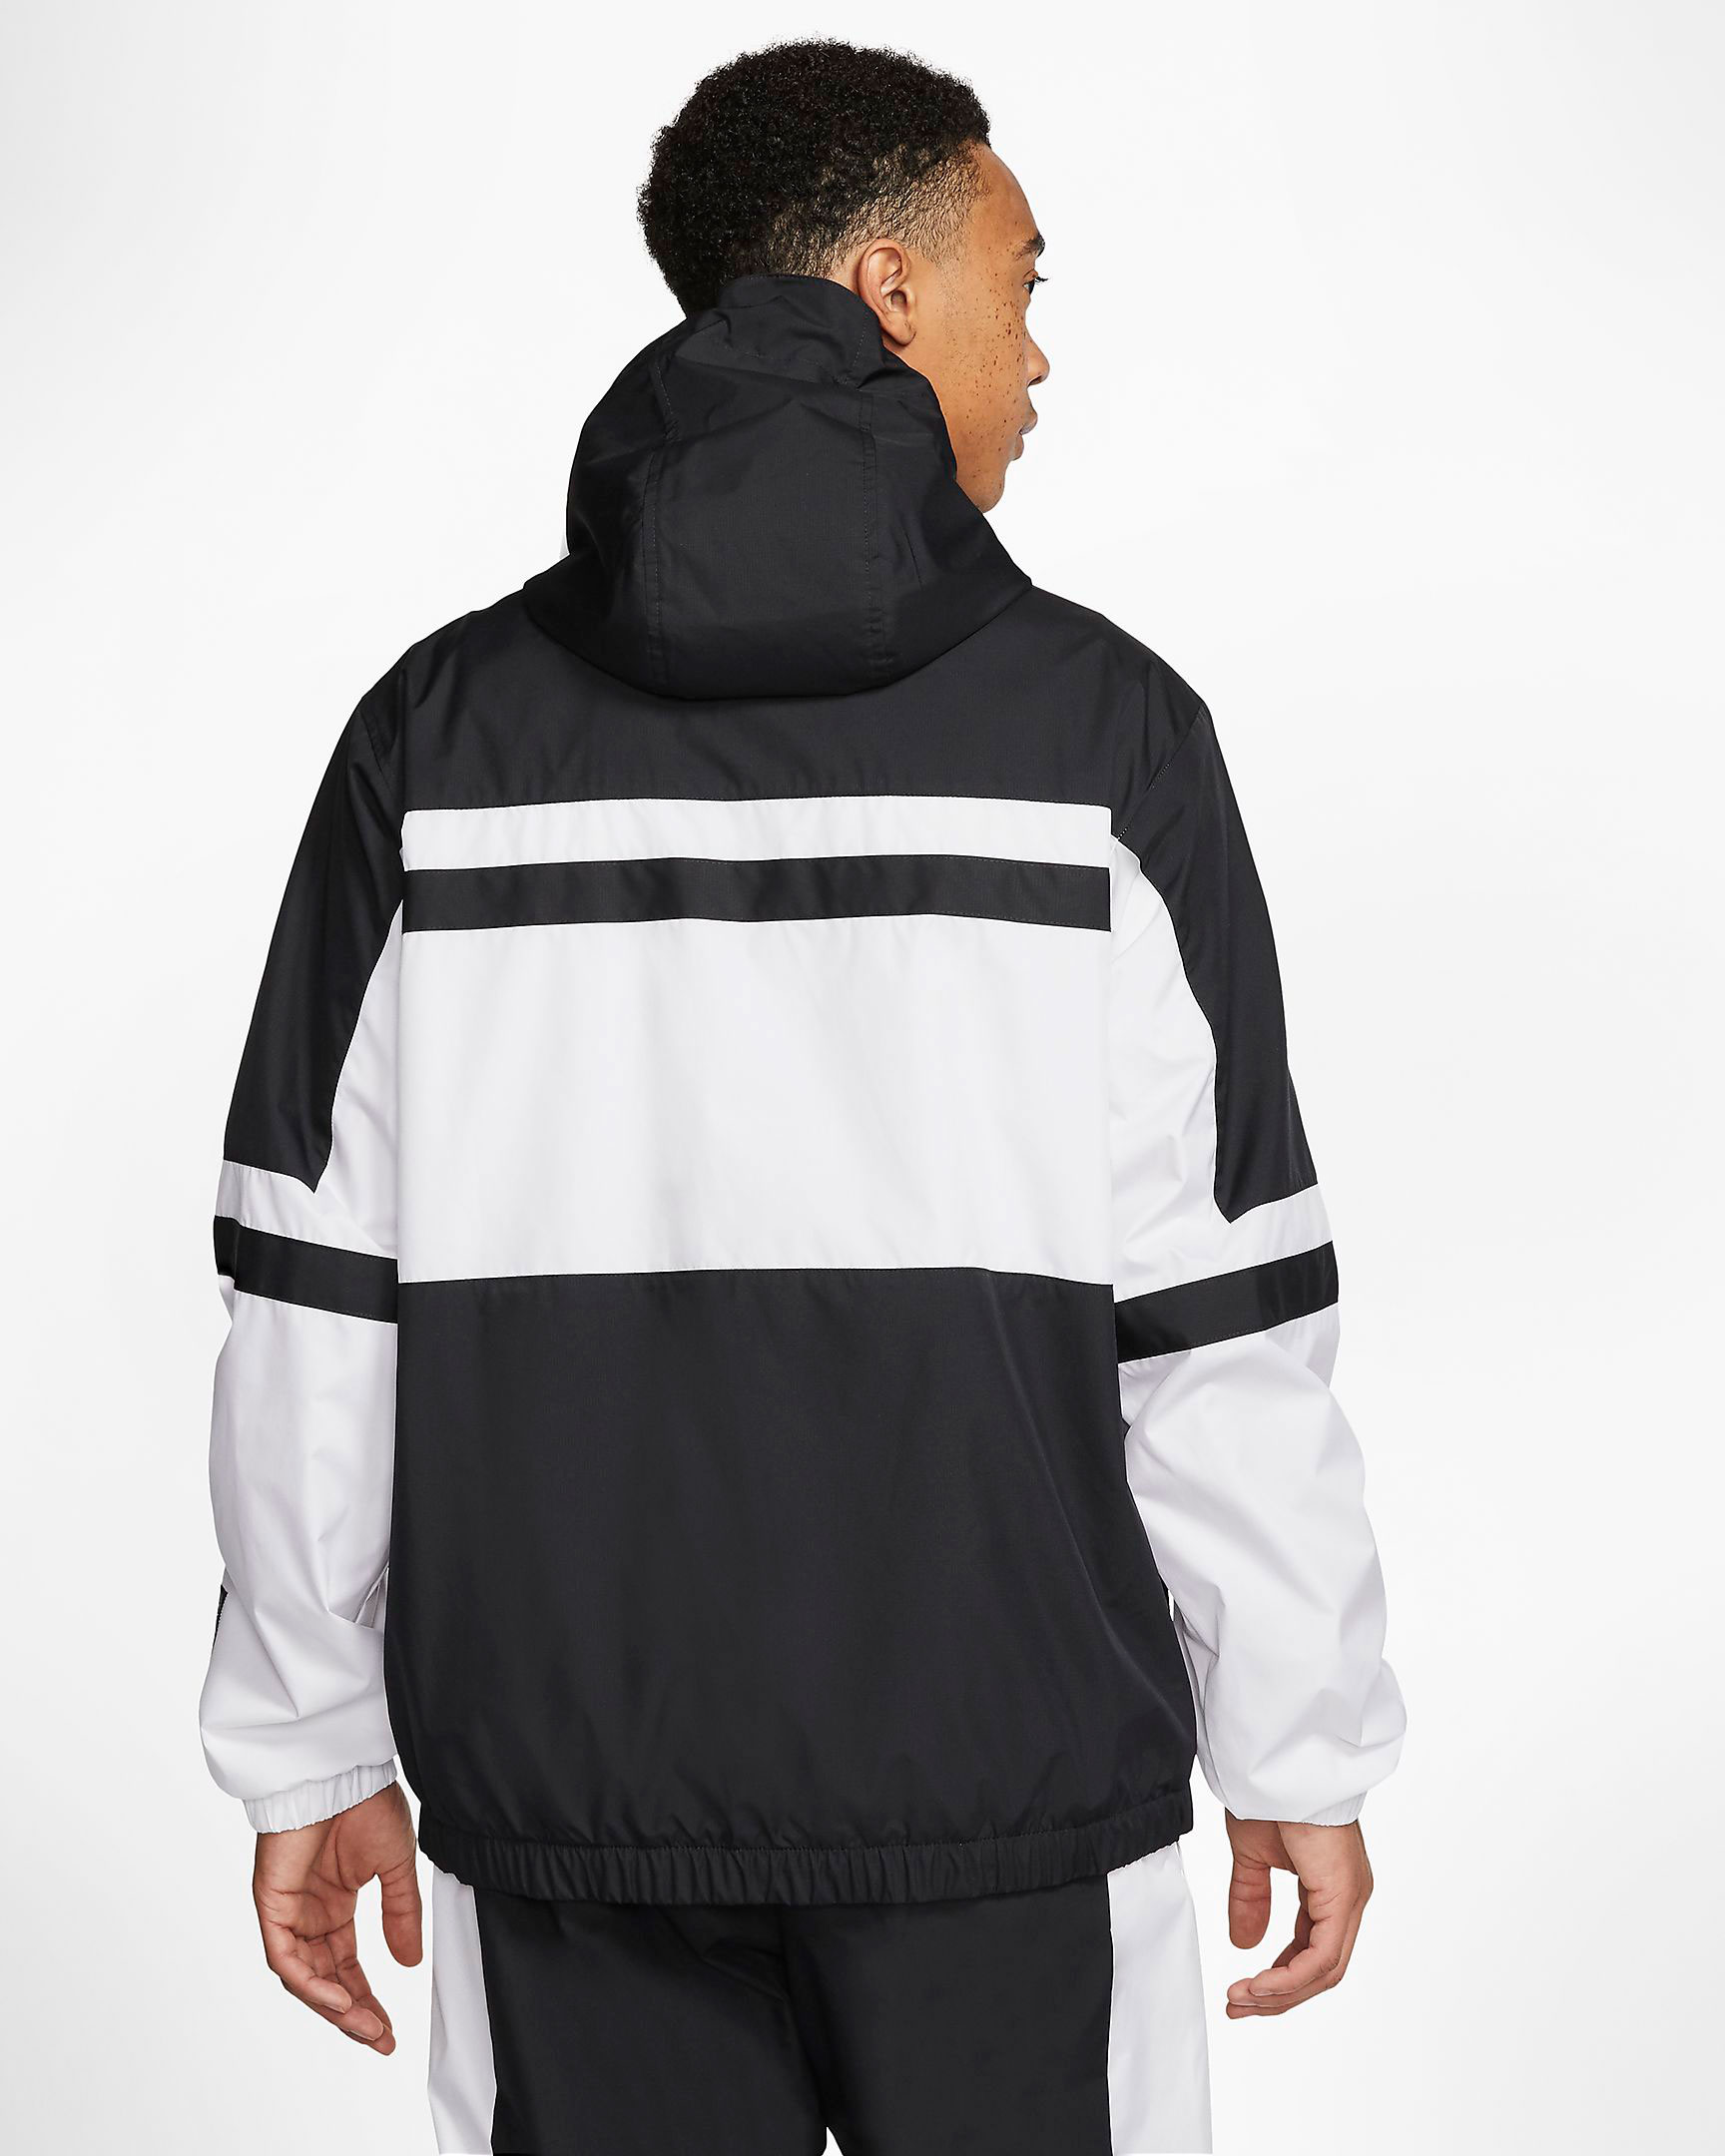 NEW Nike Air Apparel for Spring 2020 | SneakerFits.com